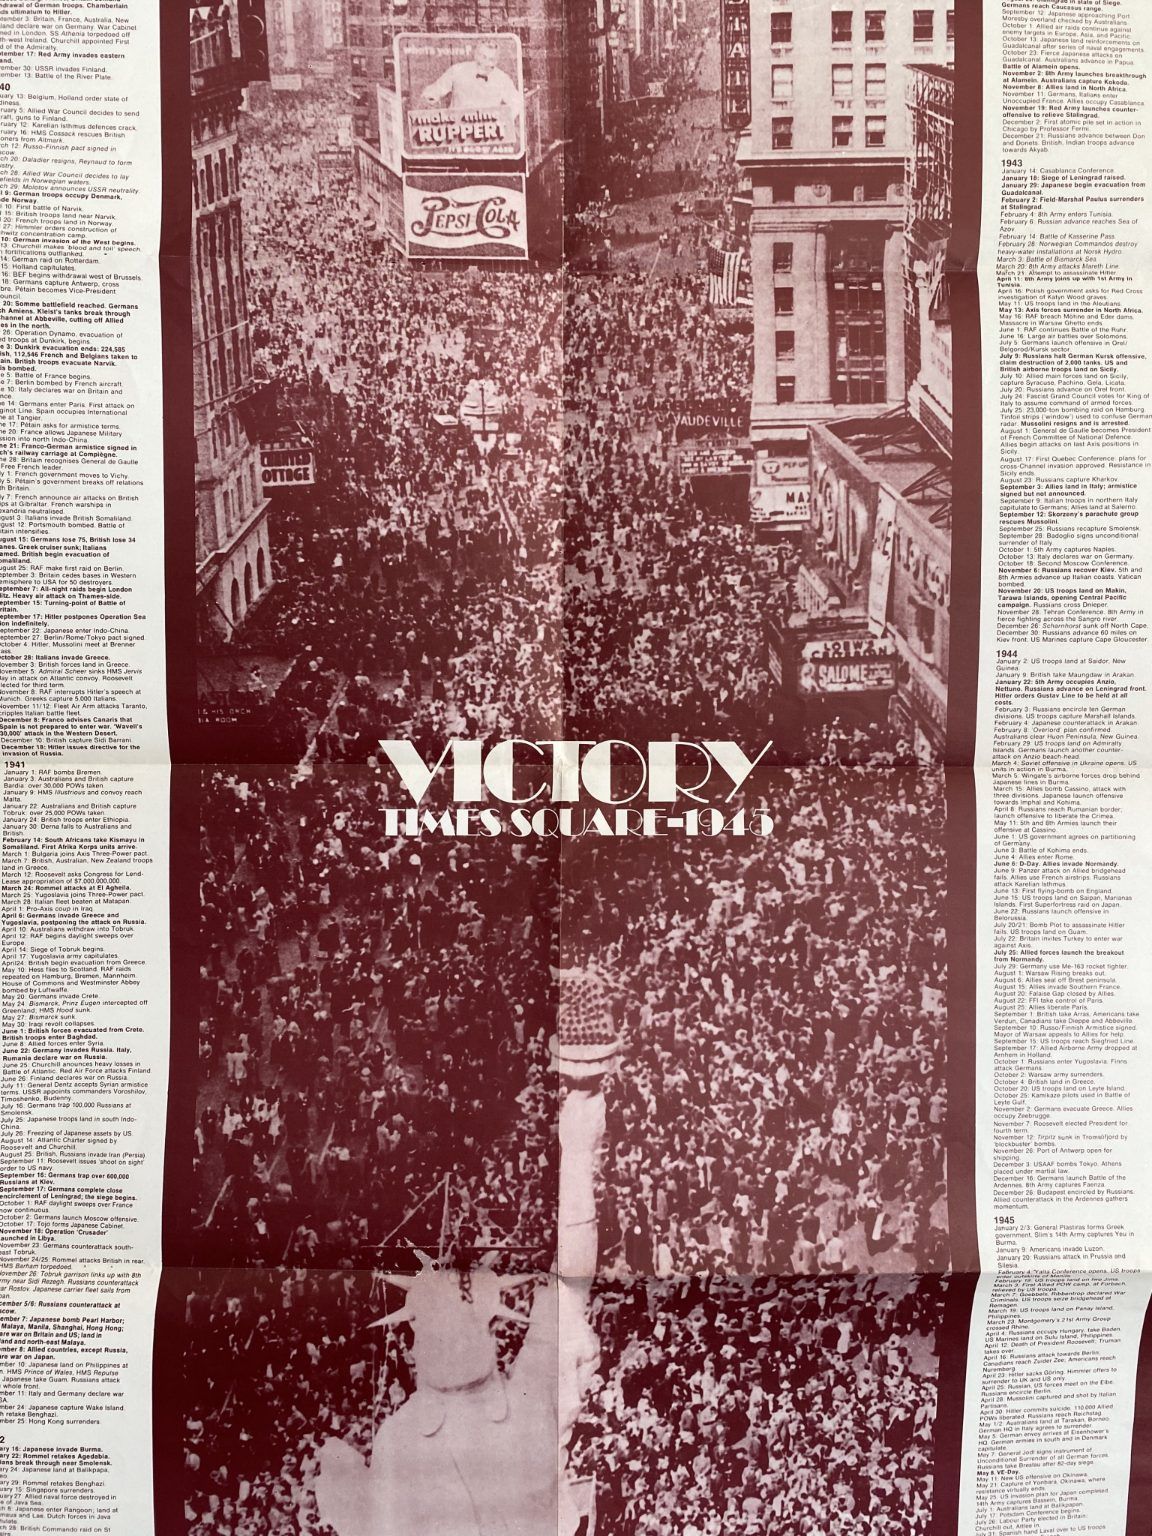 VINTAGE POSTER: VICTORY - Times Square 1945